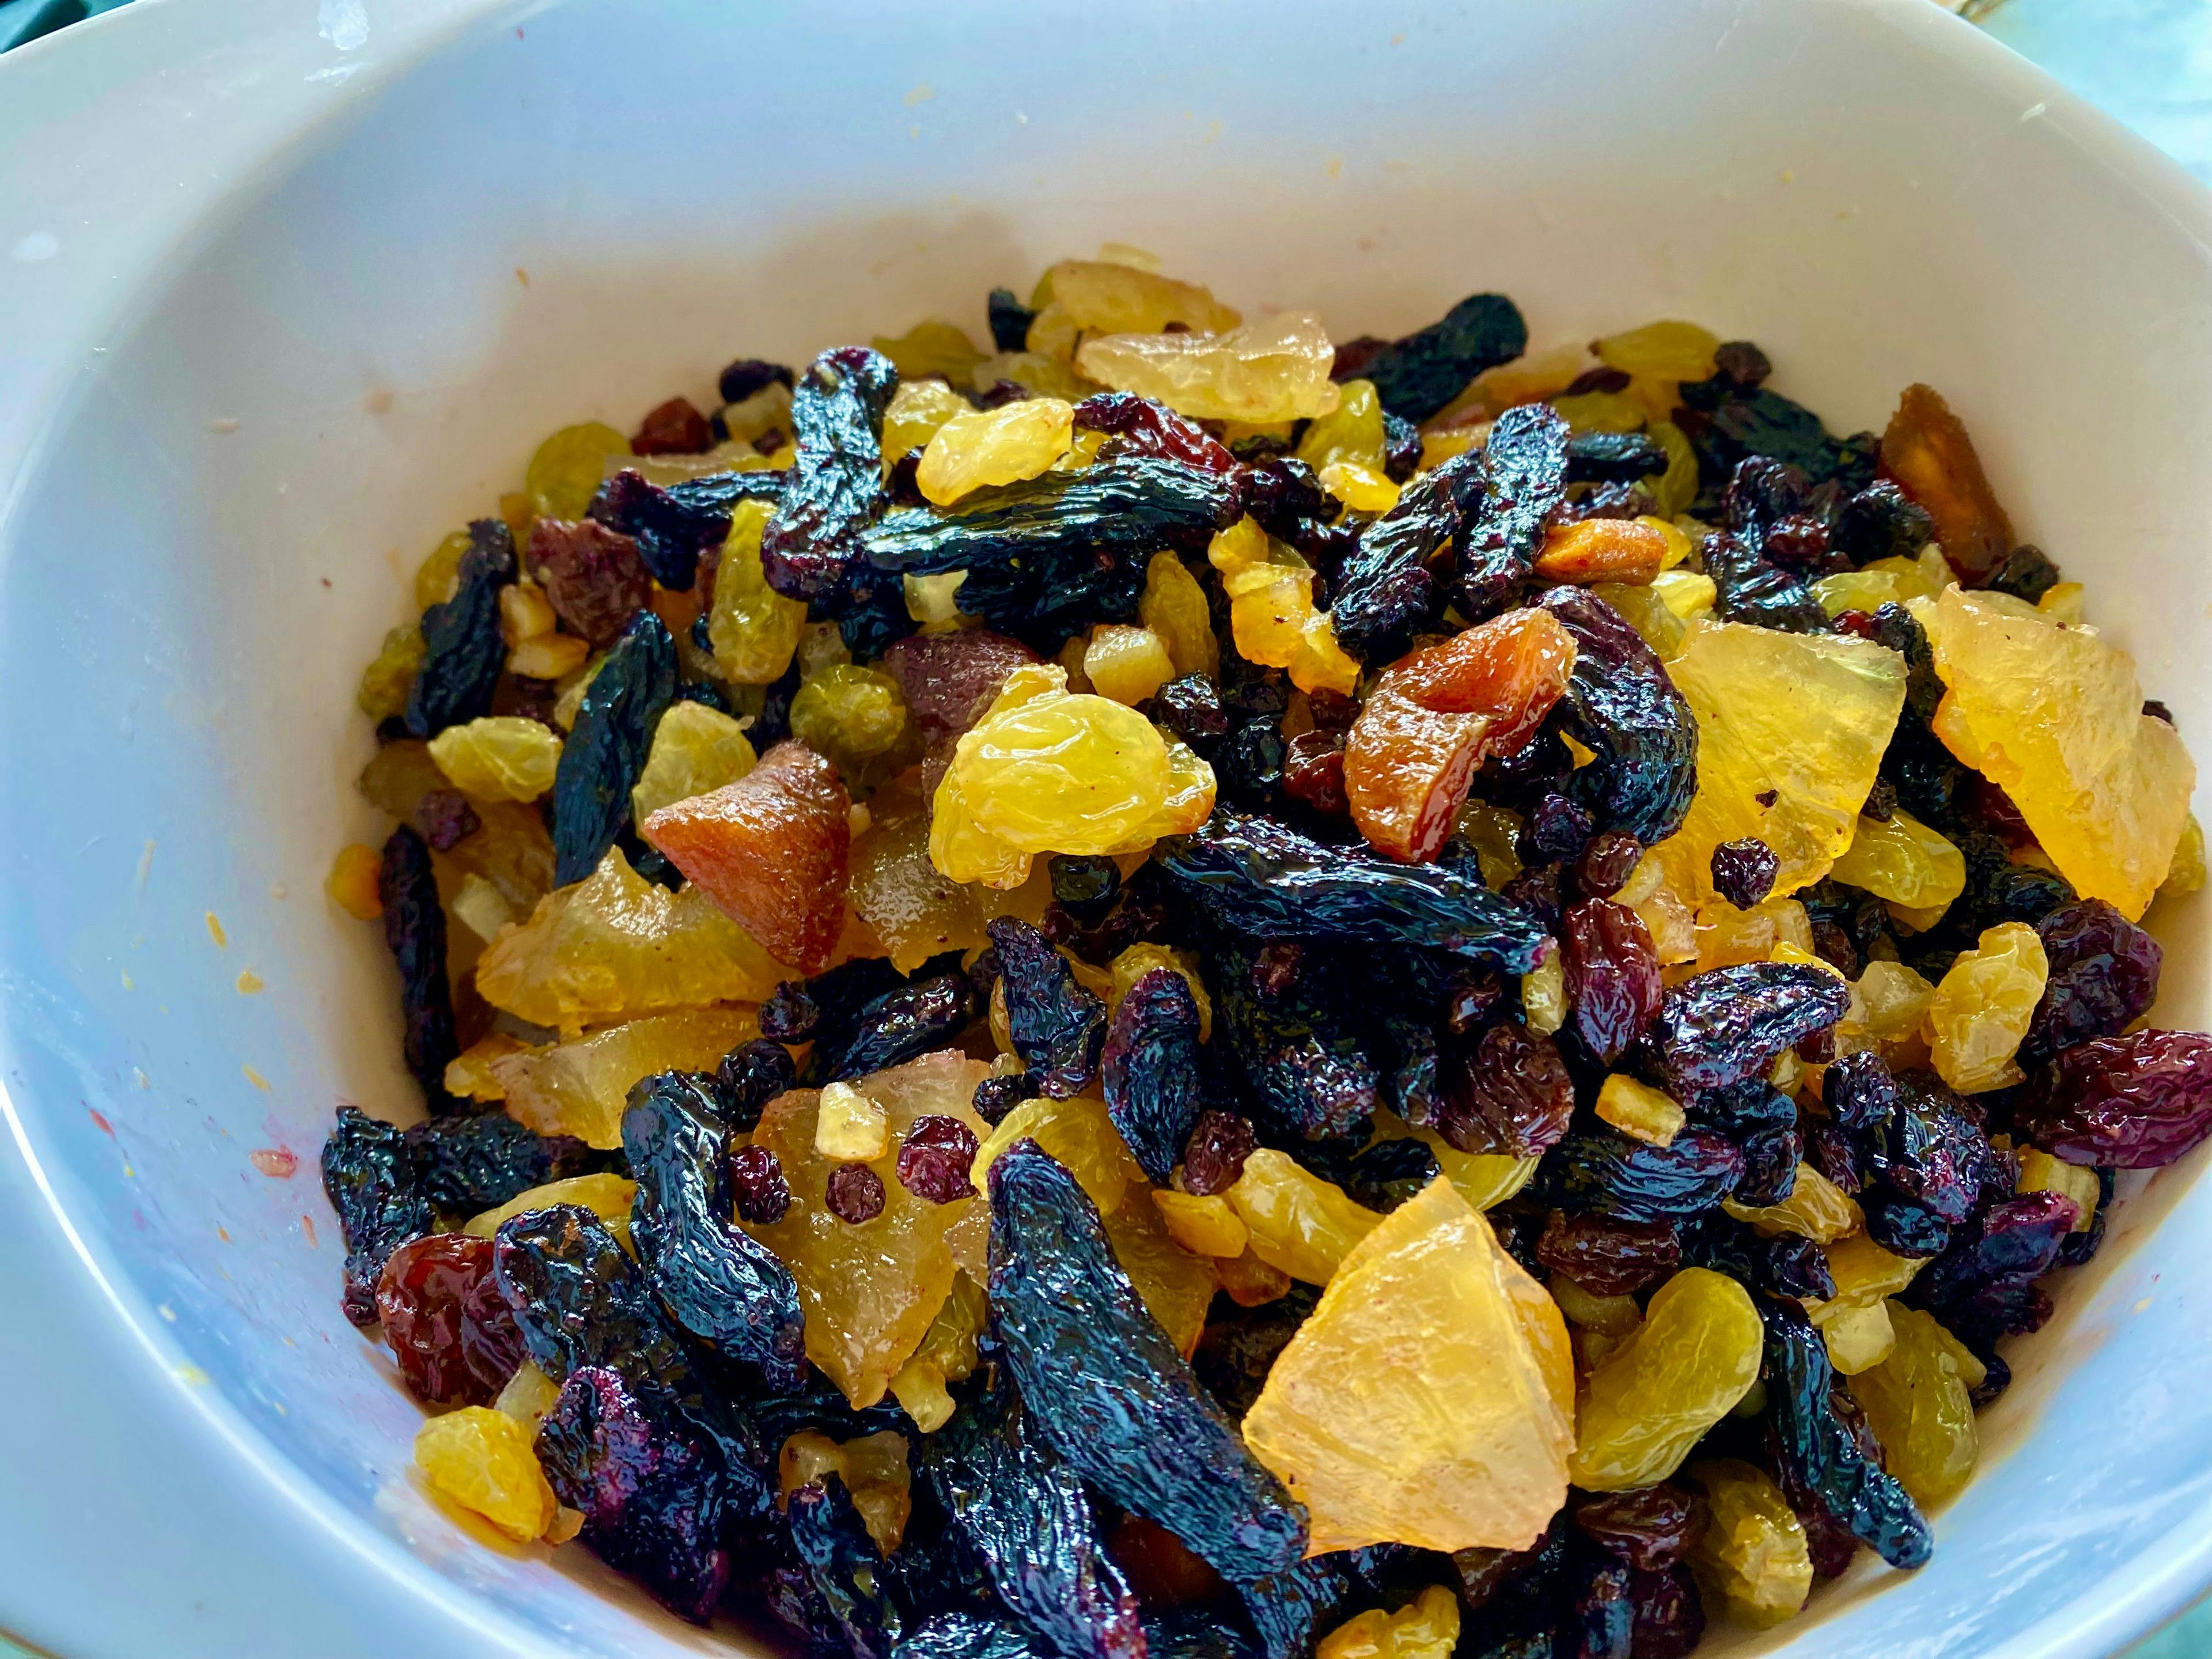 dried fruit in a bowl